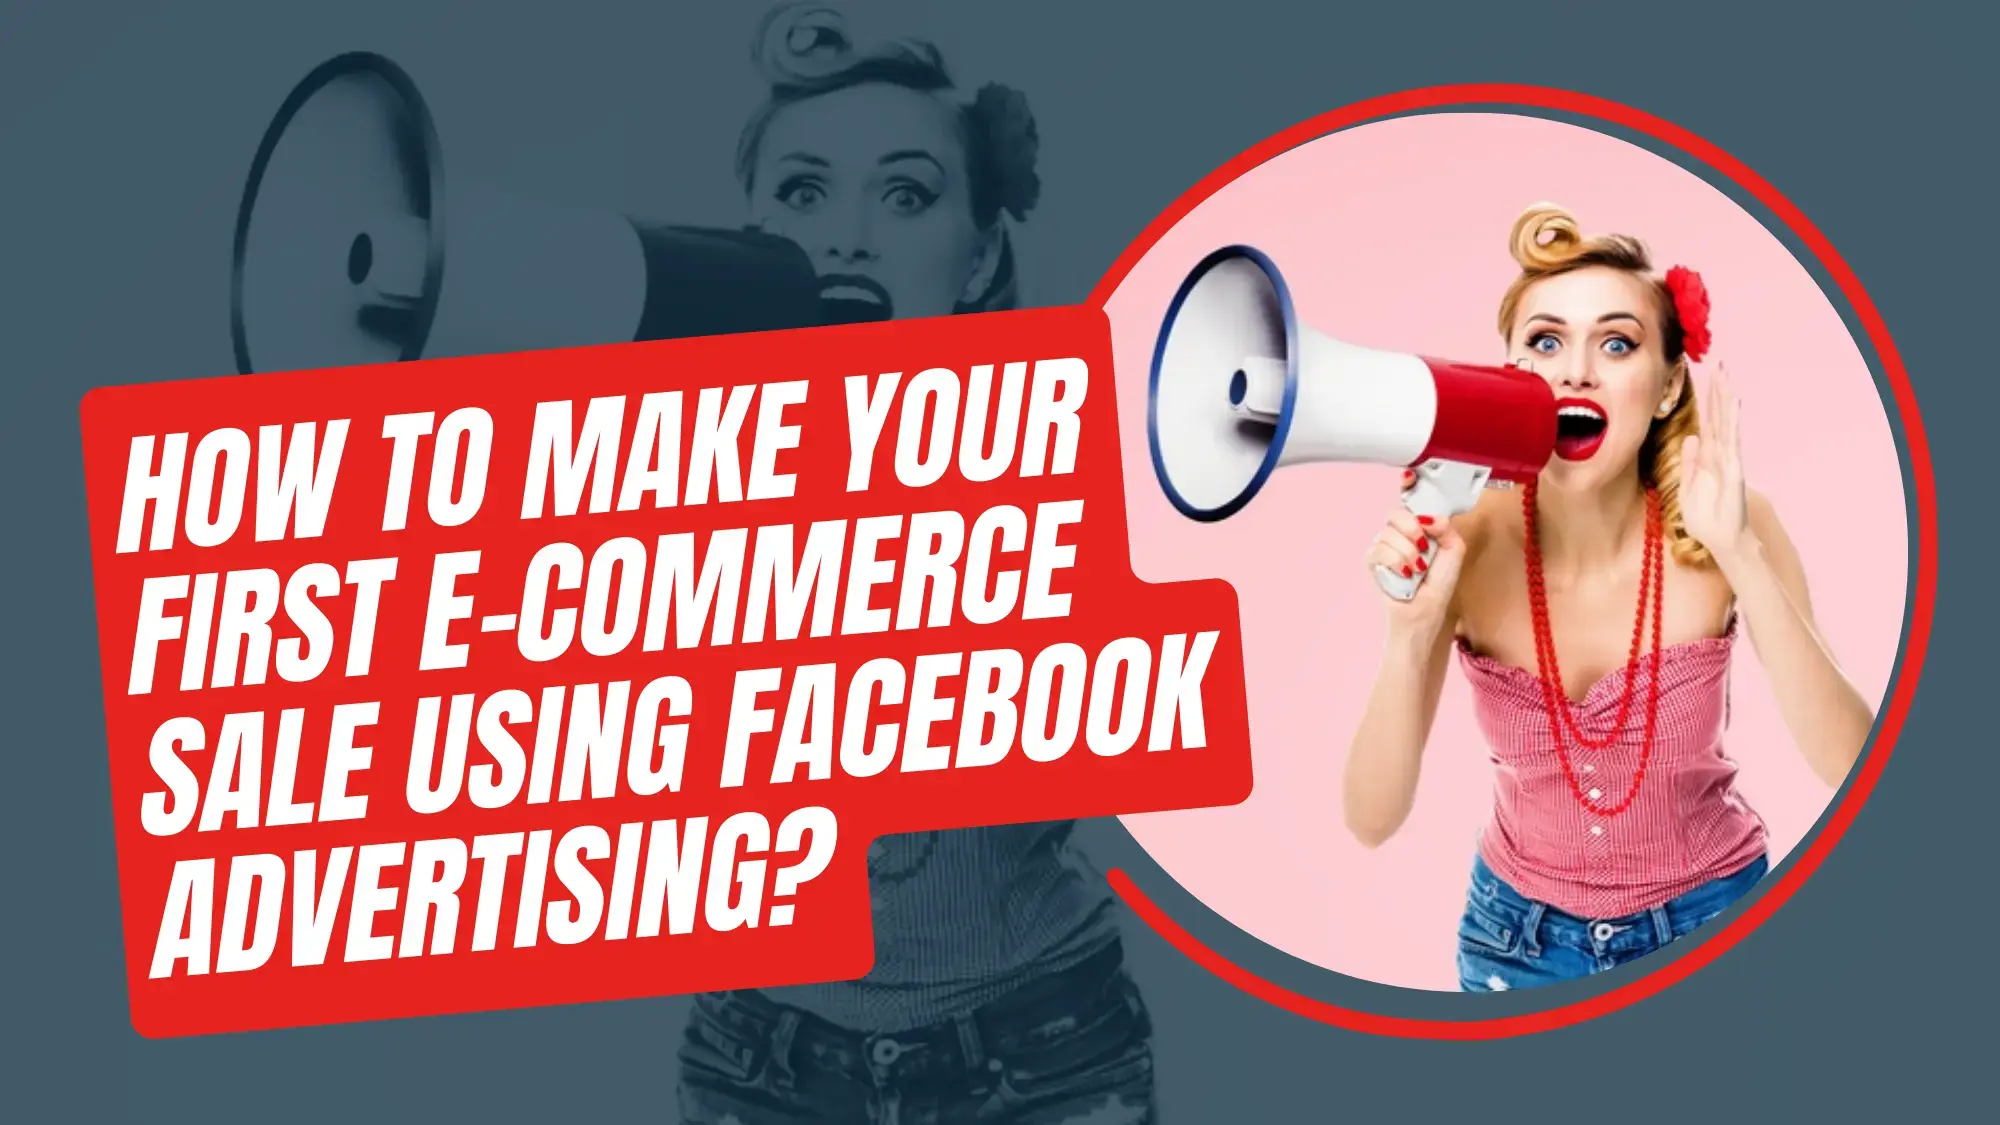 How to Make Your First E-commerce Sale Using Facebook Advertising??